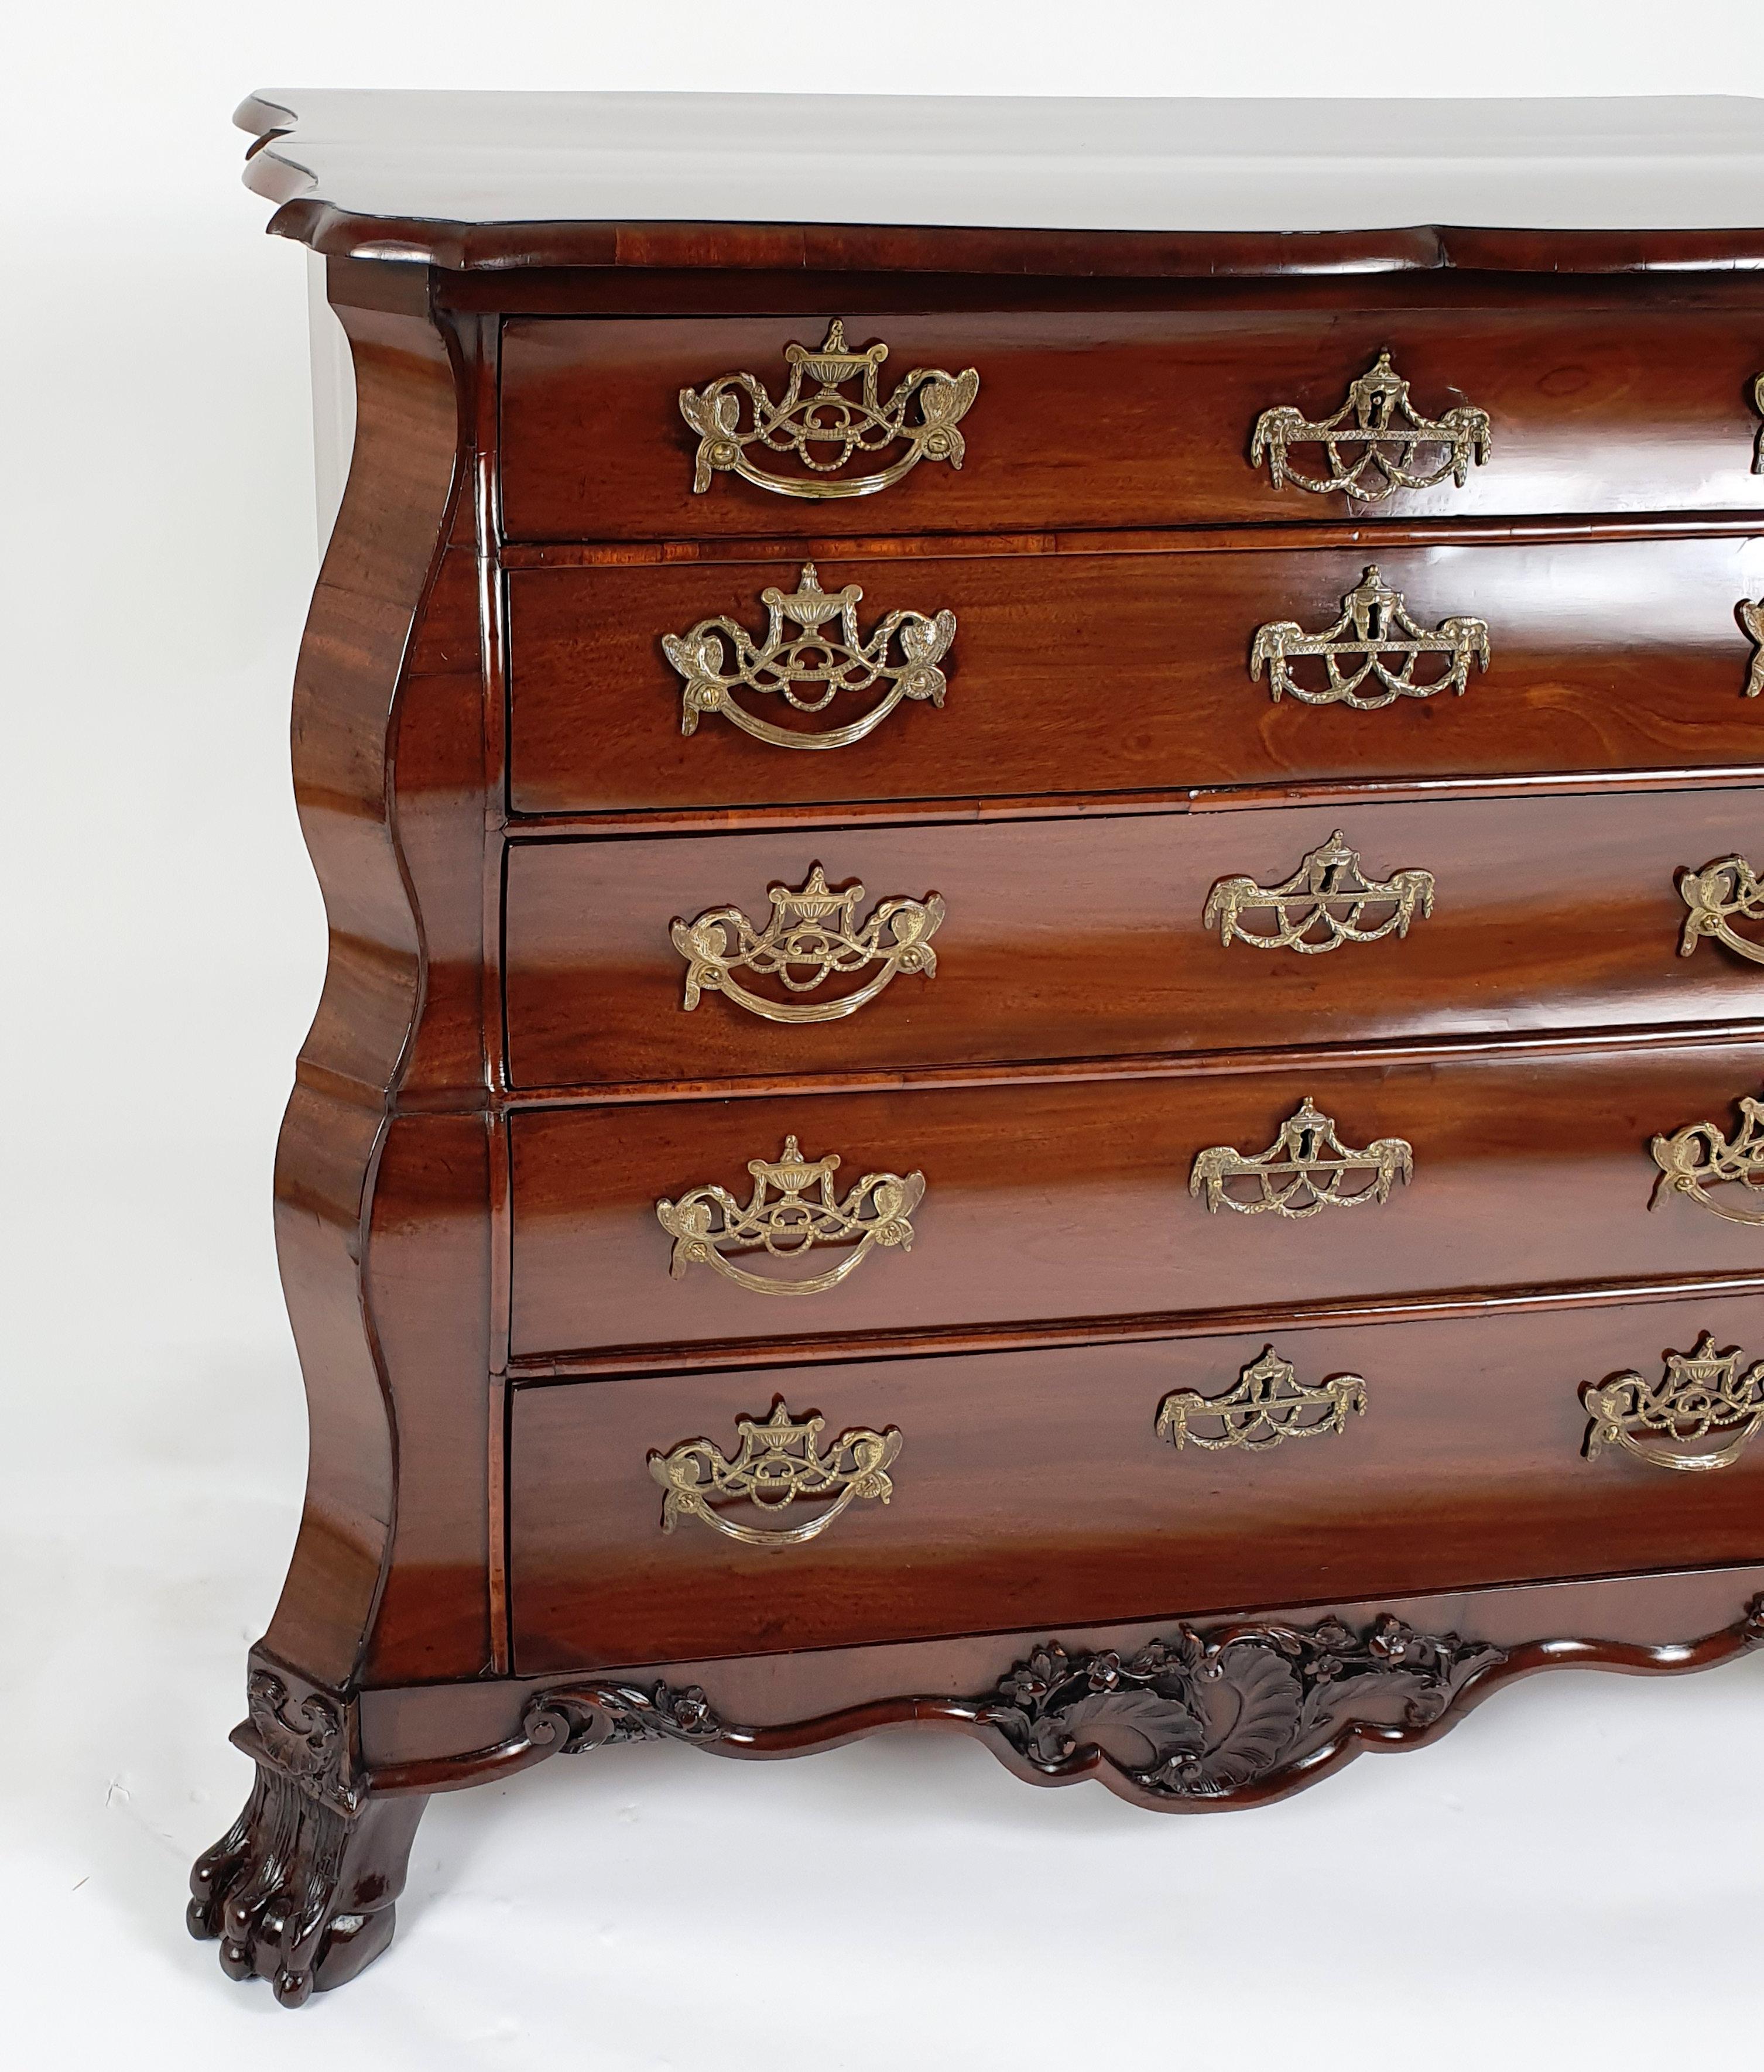 This superb and gorgeous late 18th century Dutch figured mahogany bombe shaped chest features 5 long drawers on carved ball and claw front feet with a lovely rococo carved apron. The chest measures 38 in – 96.5 cm wide, 22 ¼ in – 56.5 cm deep and 34